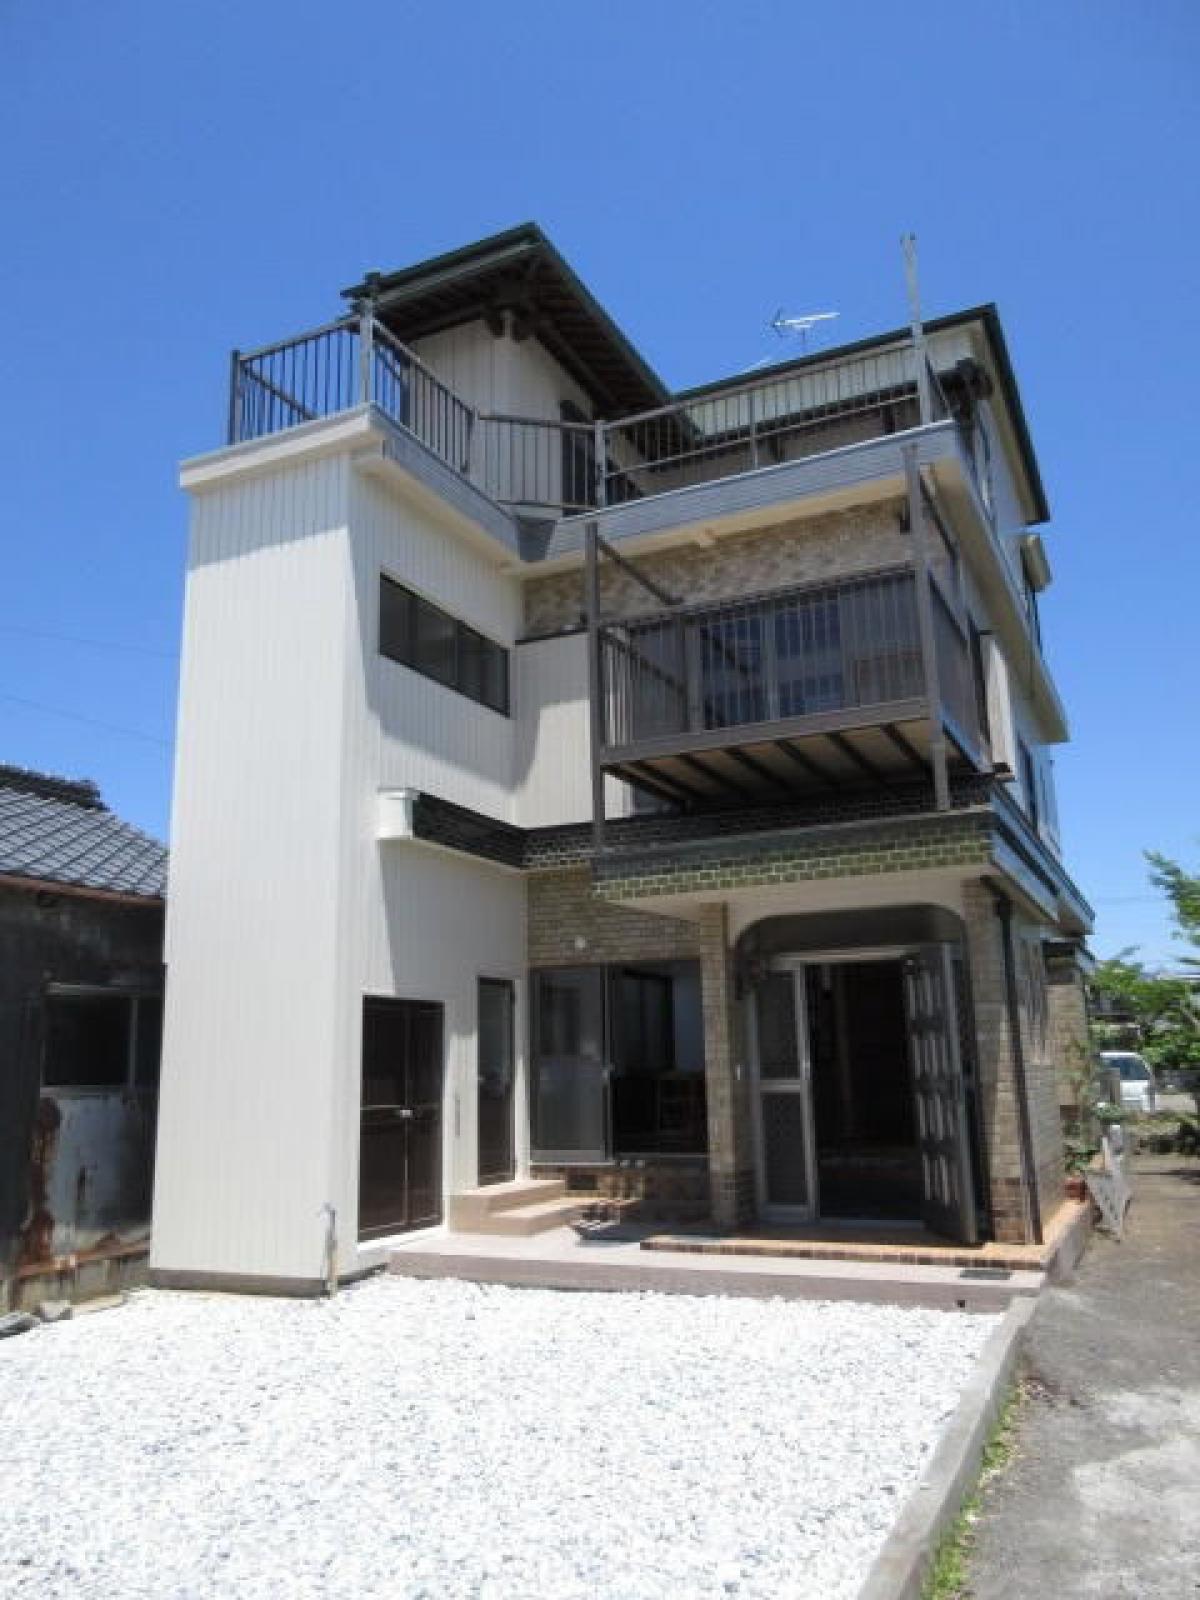 Picture of Home For Sale in Tosa Shi, Kochi, Japan